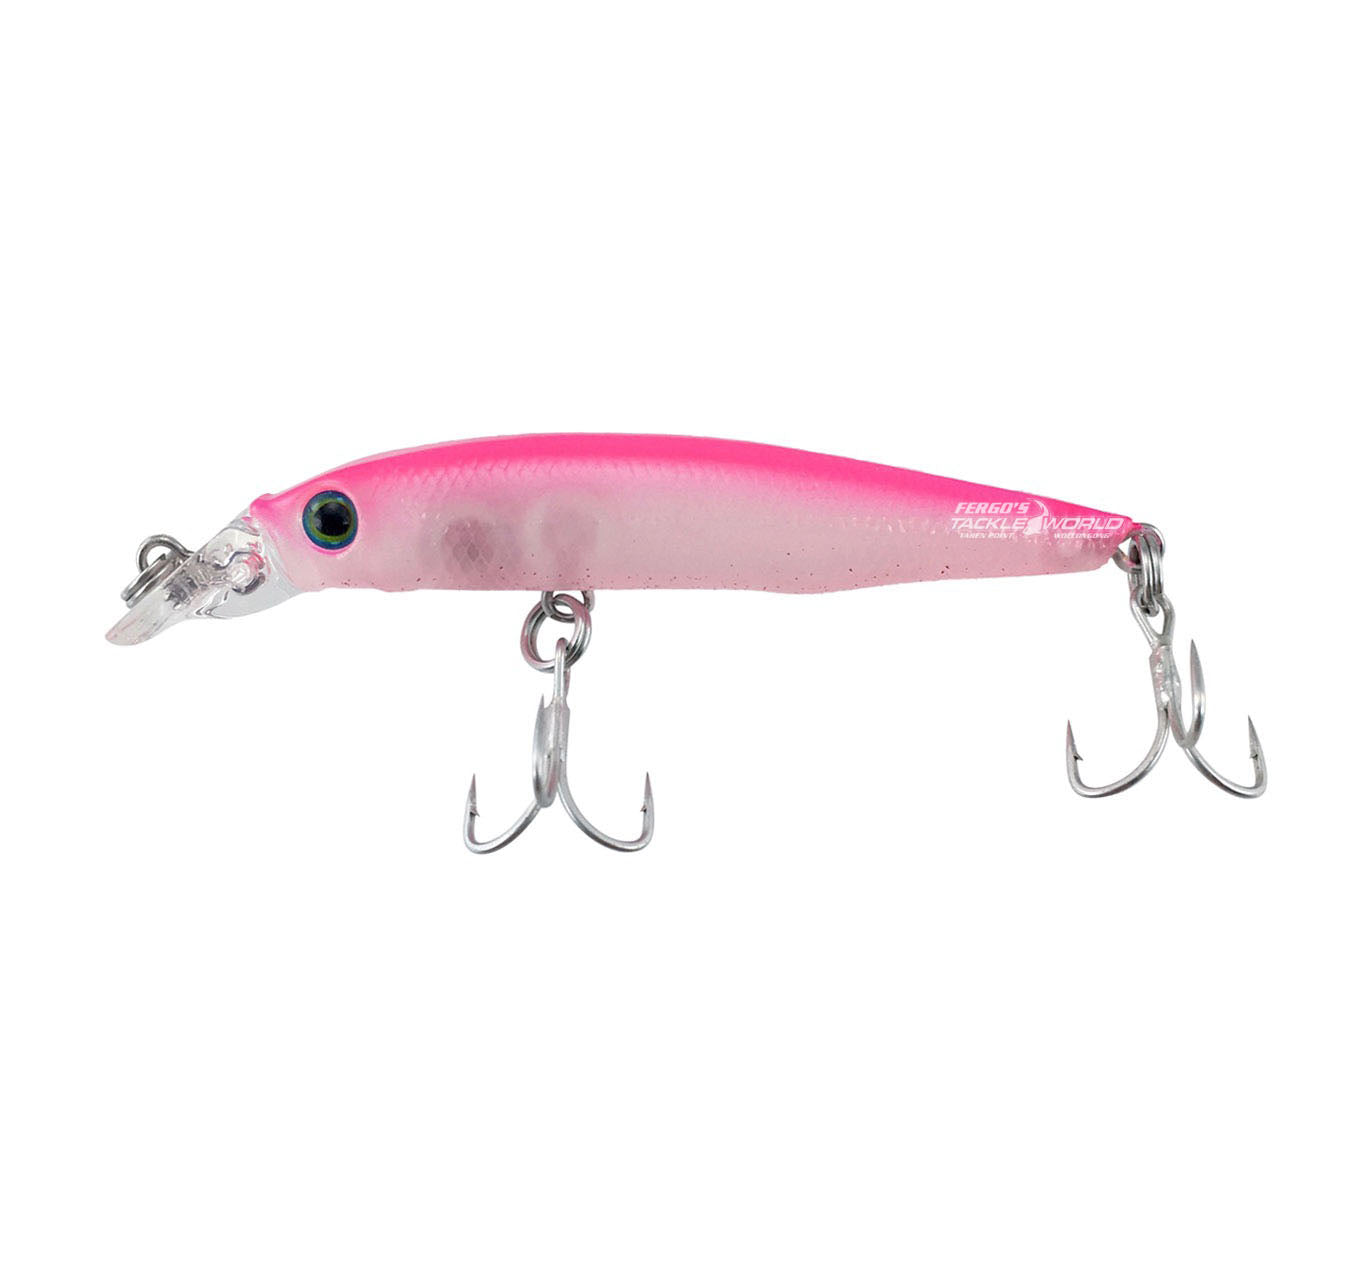 The Best Lure For Kids! - Fergo's Tackle World